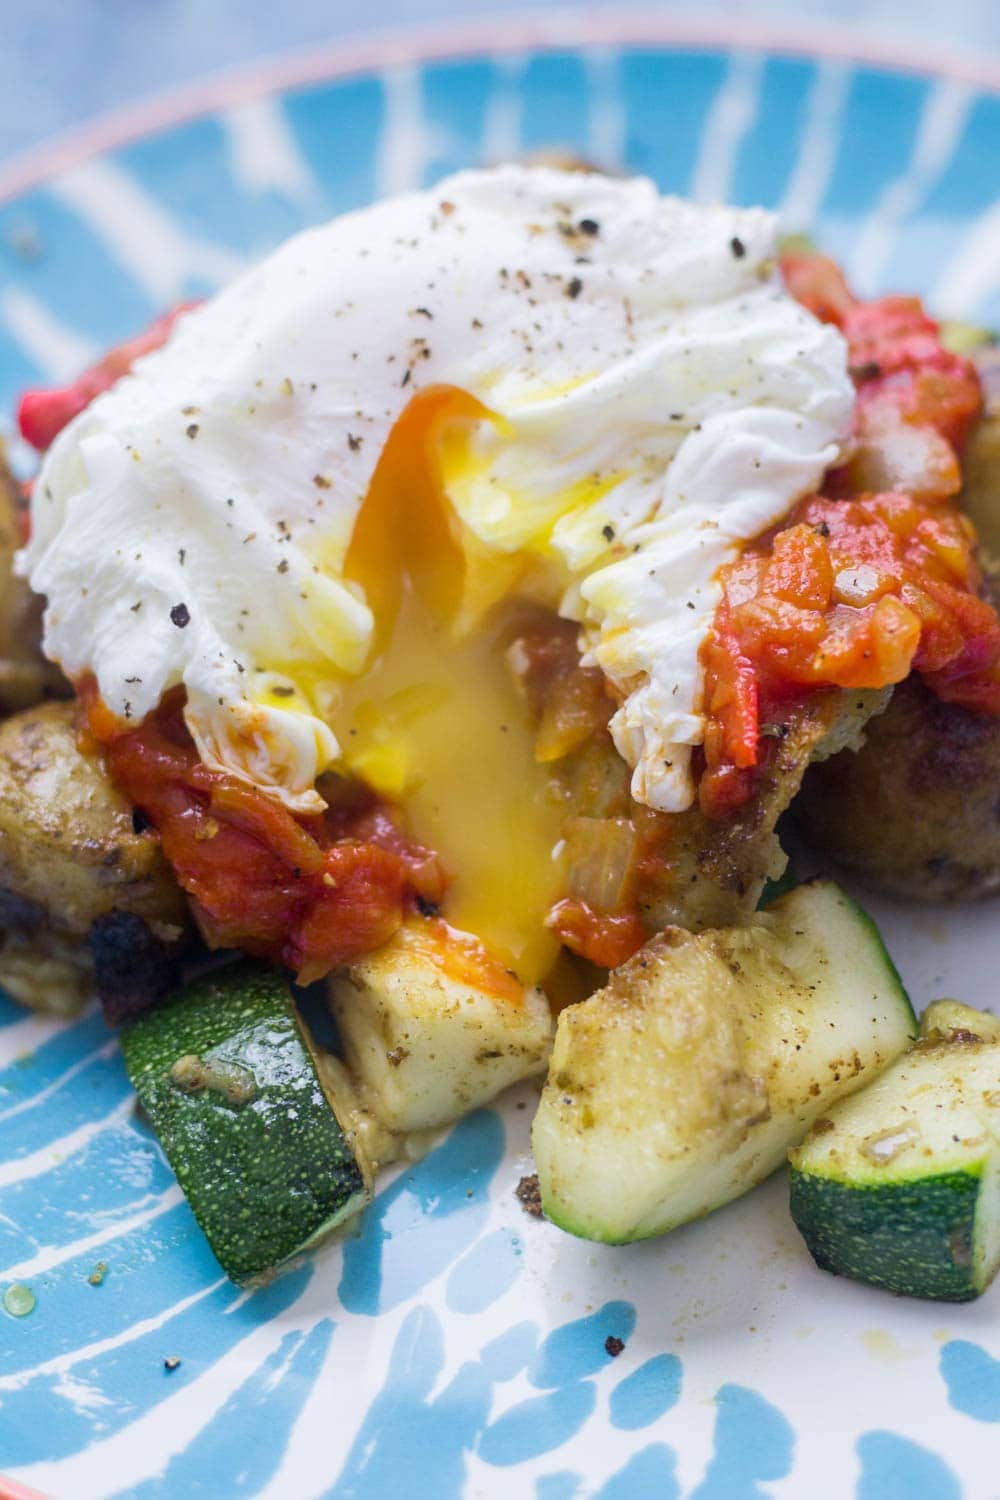 I love this potato, courgette & halloumi hash for breakfast, lunch or dinner! Topped with an easy tomato sauce & a poached egg it's a guaranteed winner.